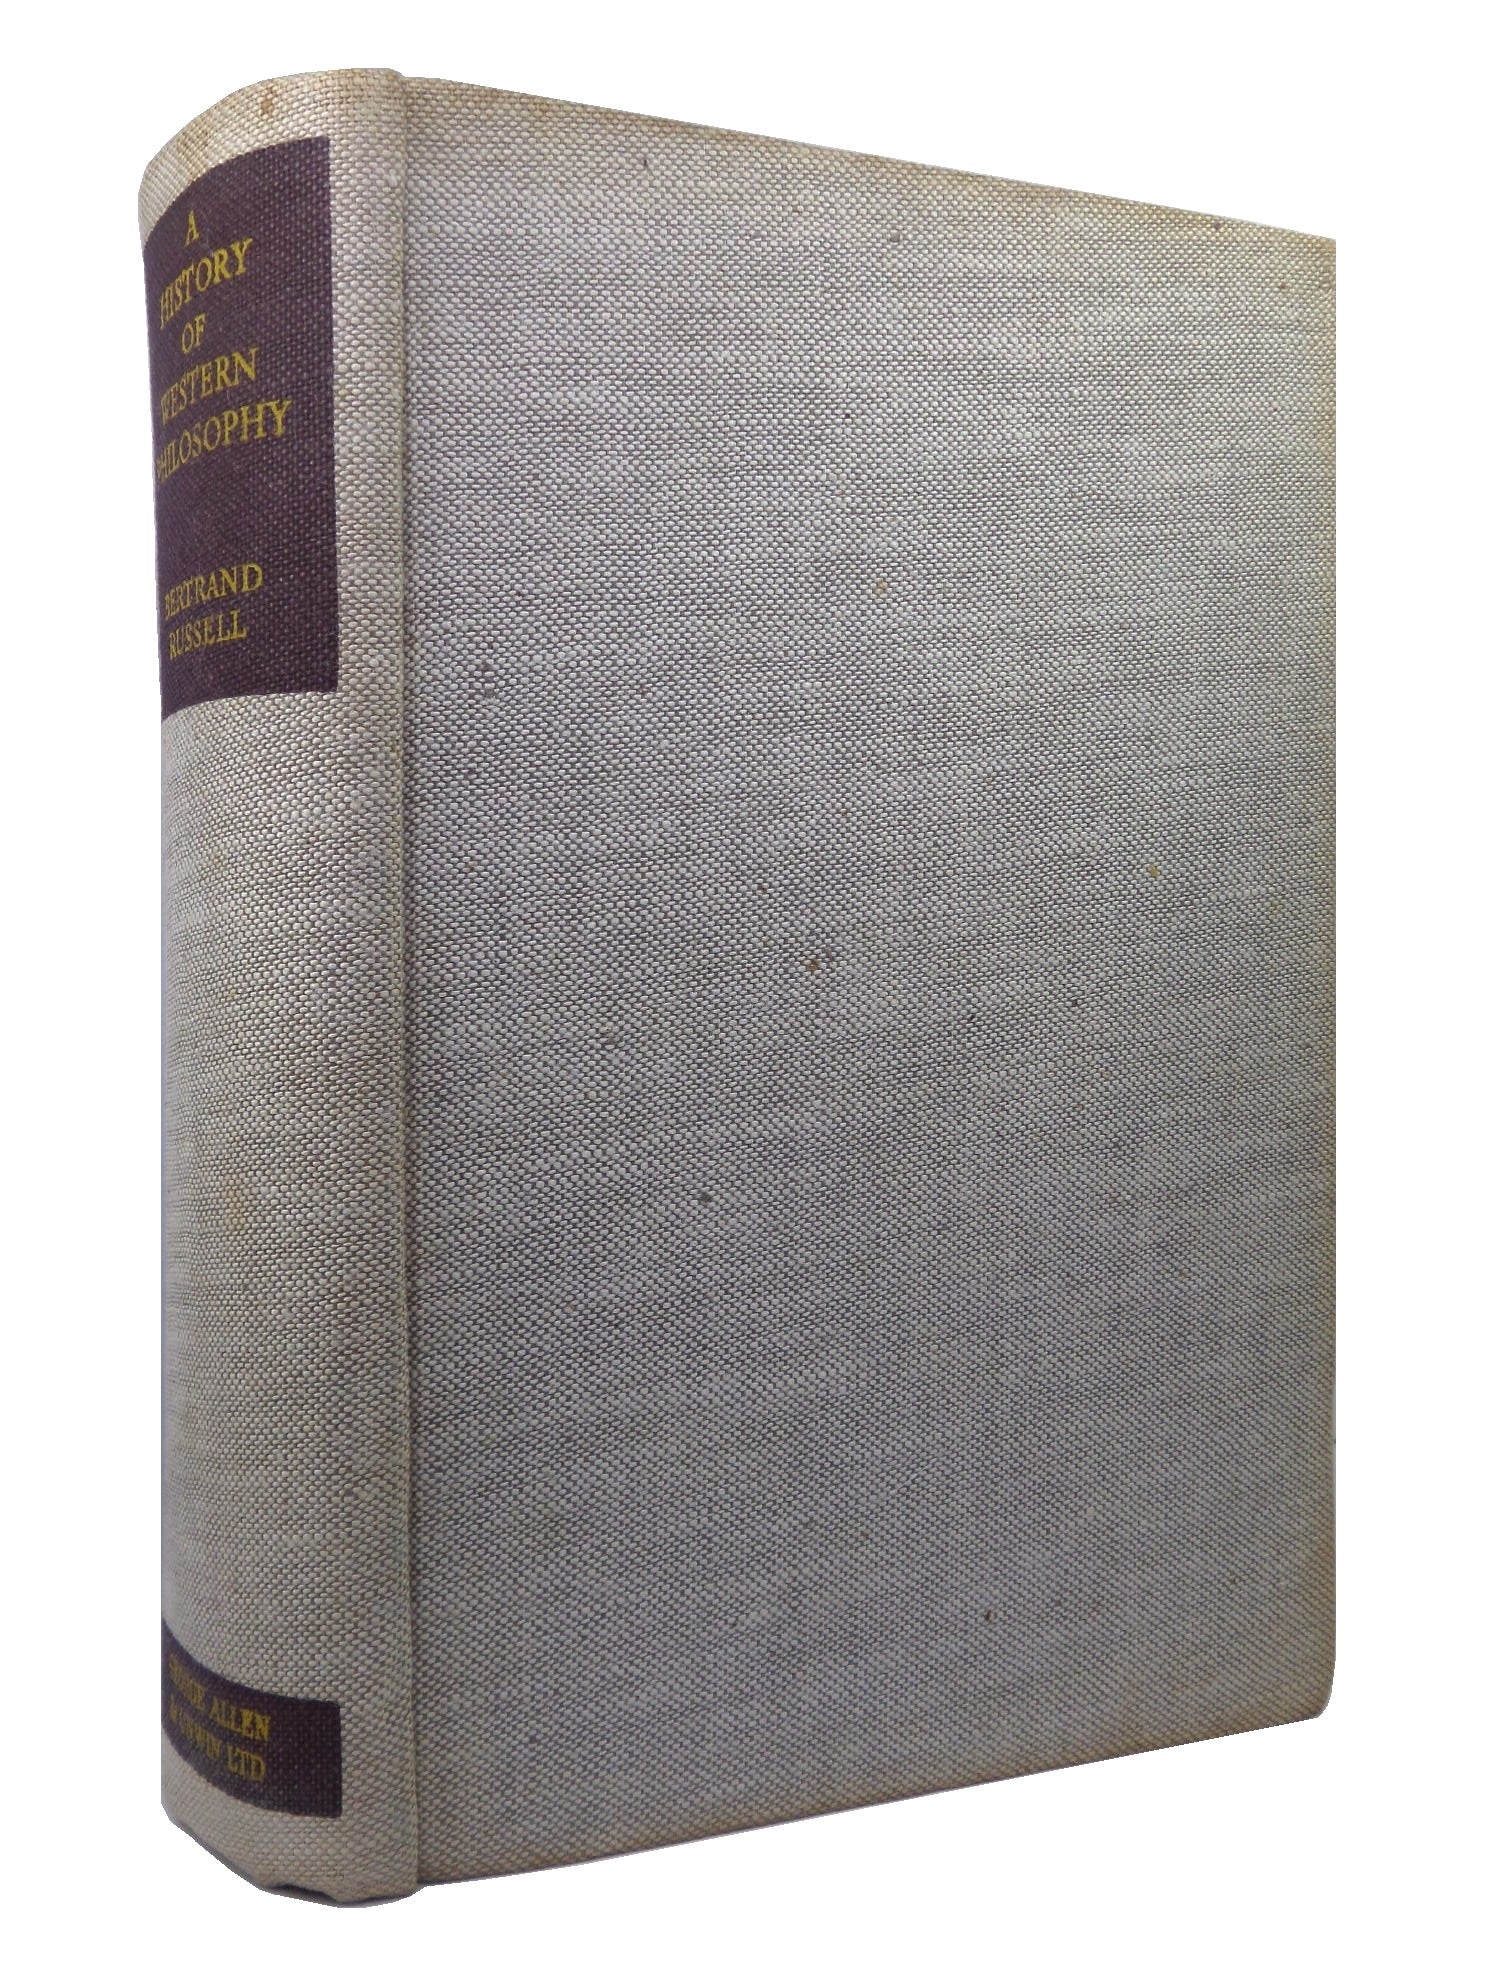 HISTORY OF WESTERN PHILOSOPHY 1946 BERTRAND RUSSELL FIRST EDITION